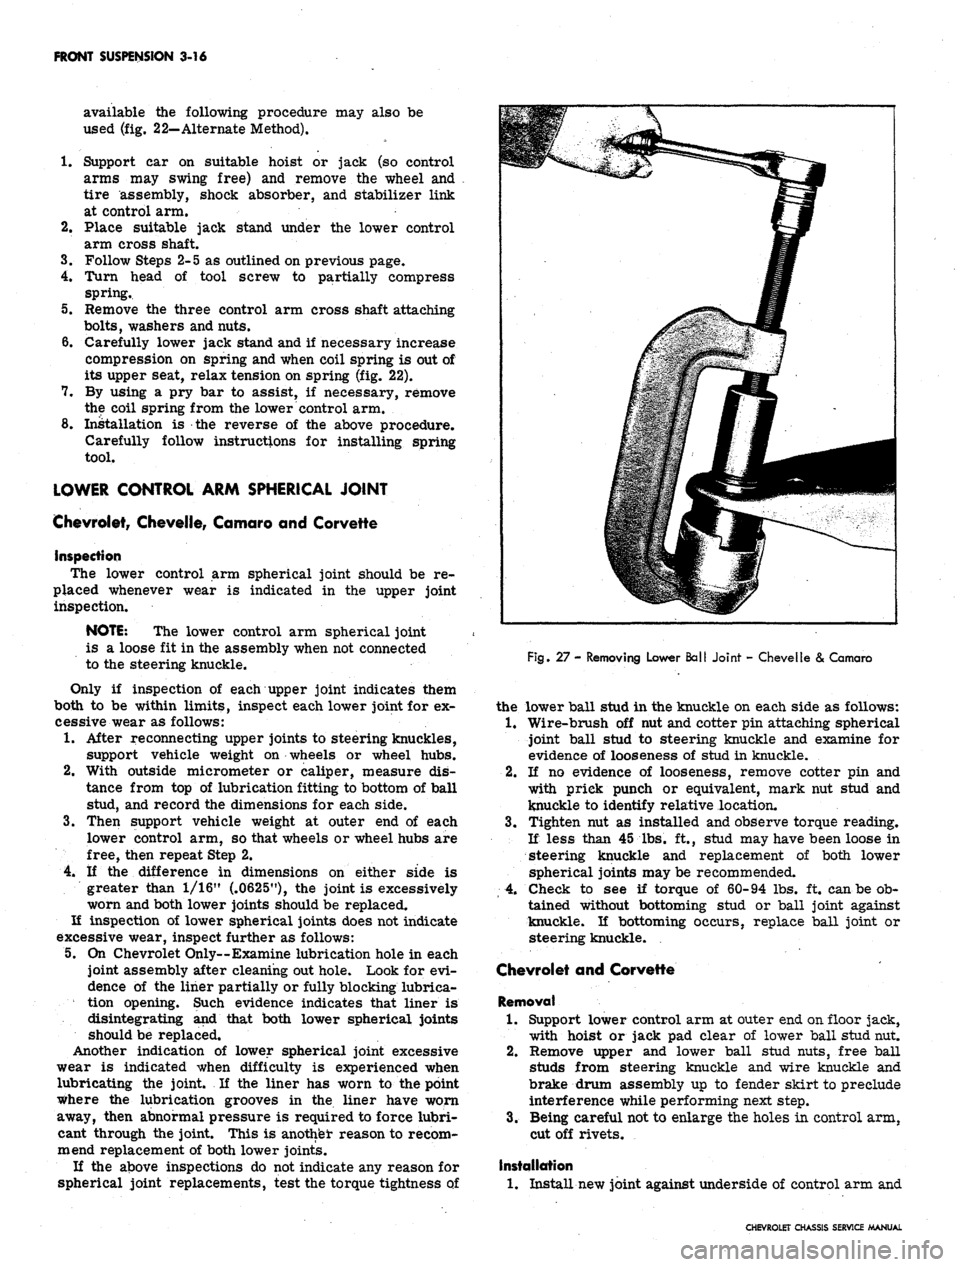 CHEVROLET CAMARO 1967 1.G Chassis Owners Manual 
FRONT SUSPENSION 3-16

available the following procedure may also be

used (fig. 22-Alternate Method).

1.
 Support car on suitable hoist or jack (so control

arms may swing free) and remove the whee